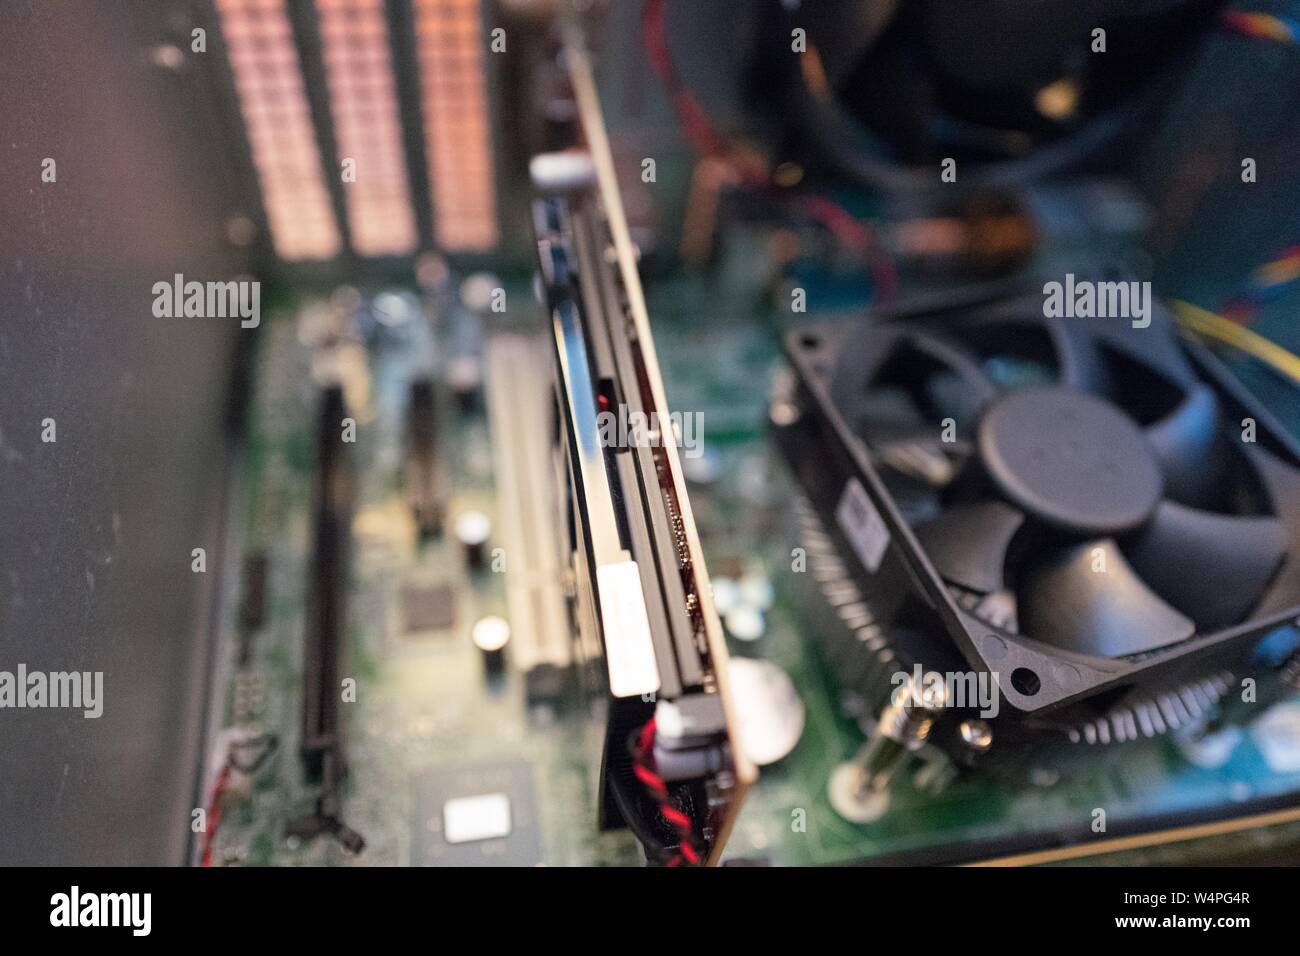 AMD Graphical Processing Unit (GPU), aka graphics card, installed in a computer for cryptocurrency mining of the Bitcoin alternative Monero, San Ramon, California, August 29, 2018. () Stock Photo